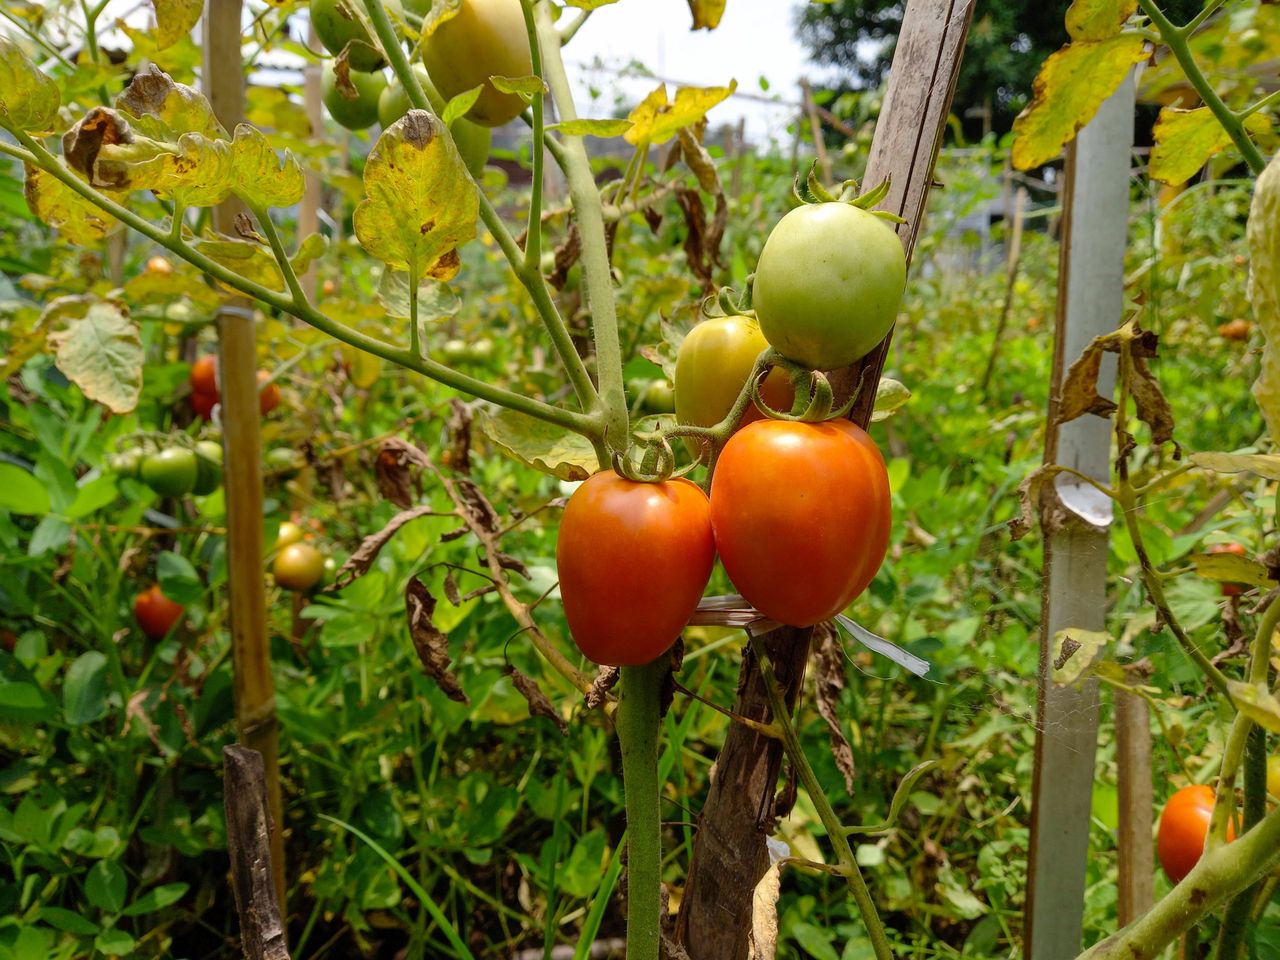 Ripe red tomatoes are on a background of green leaves, hanging on a tomato tree vine in the garden.